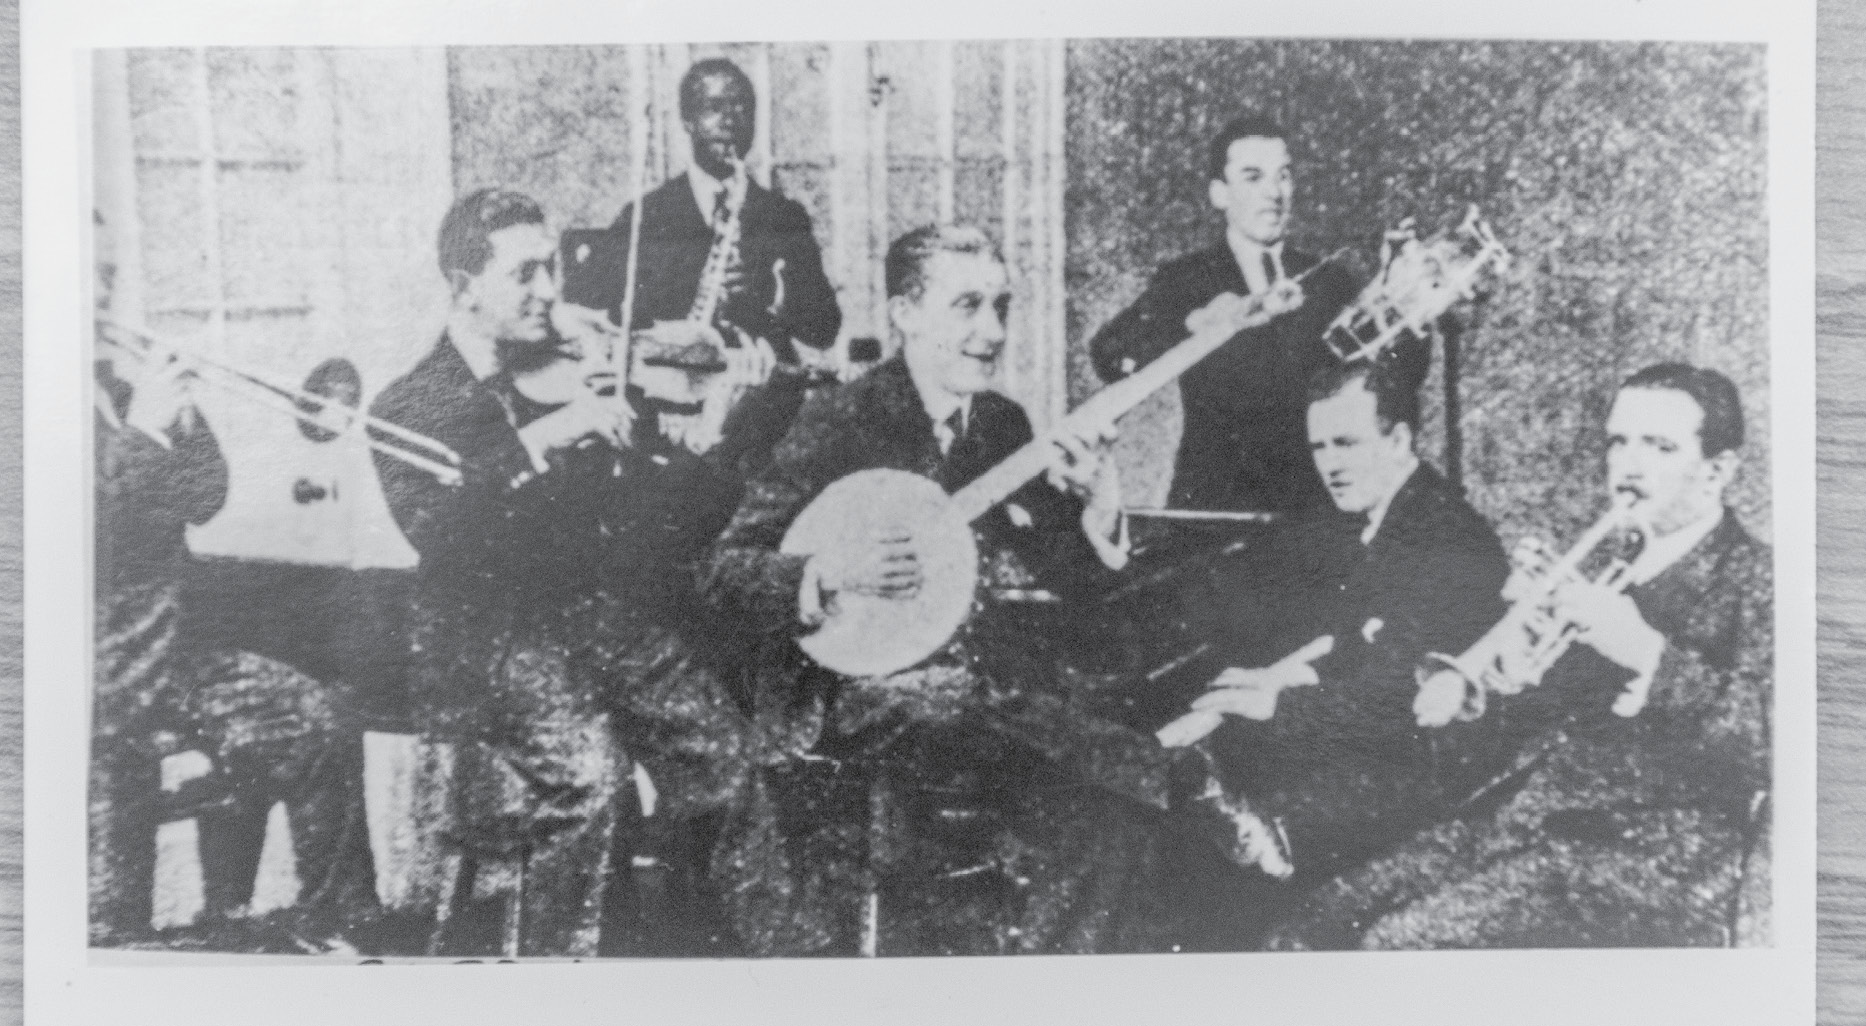 He led a popular dance band, The Queen’s Dance Orchestra (pictured here in May 1921), which cut several records.